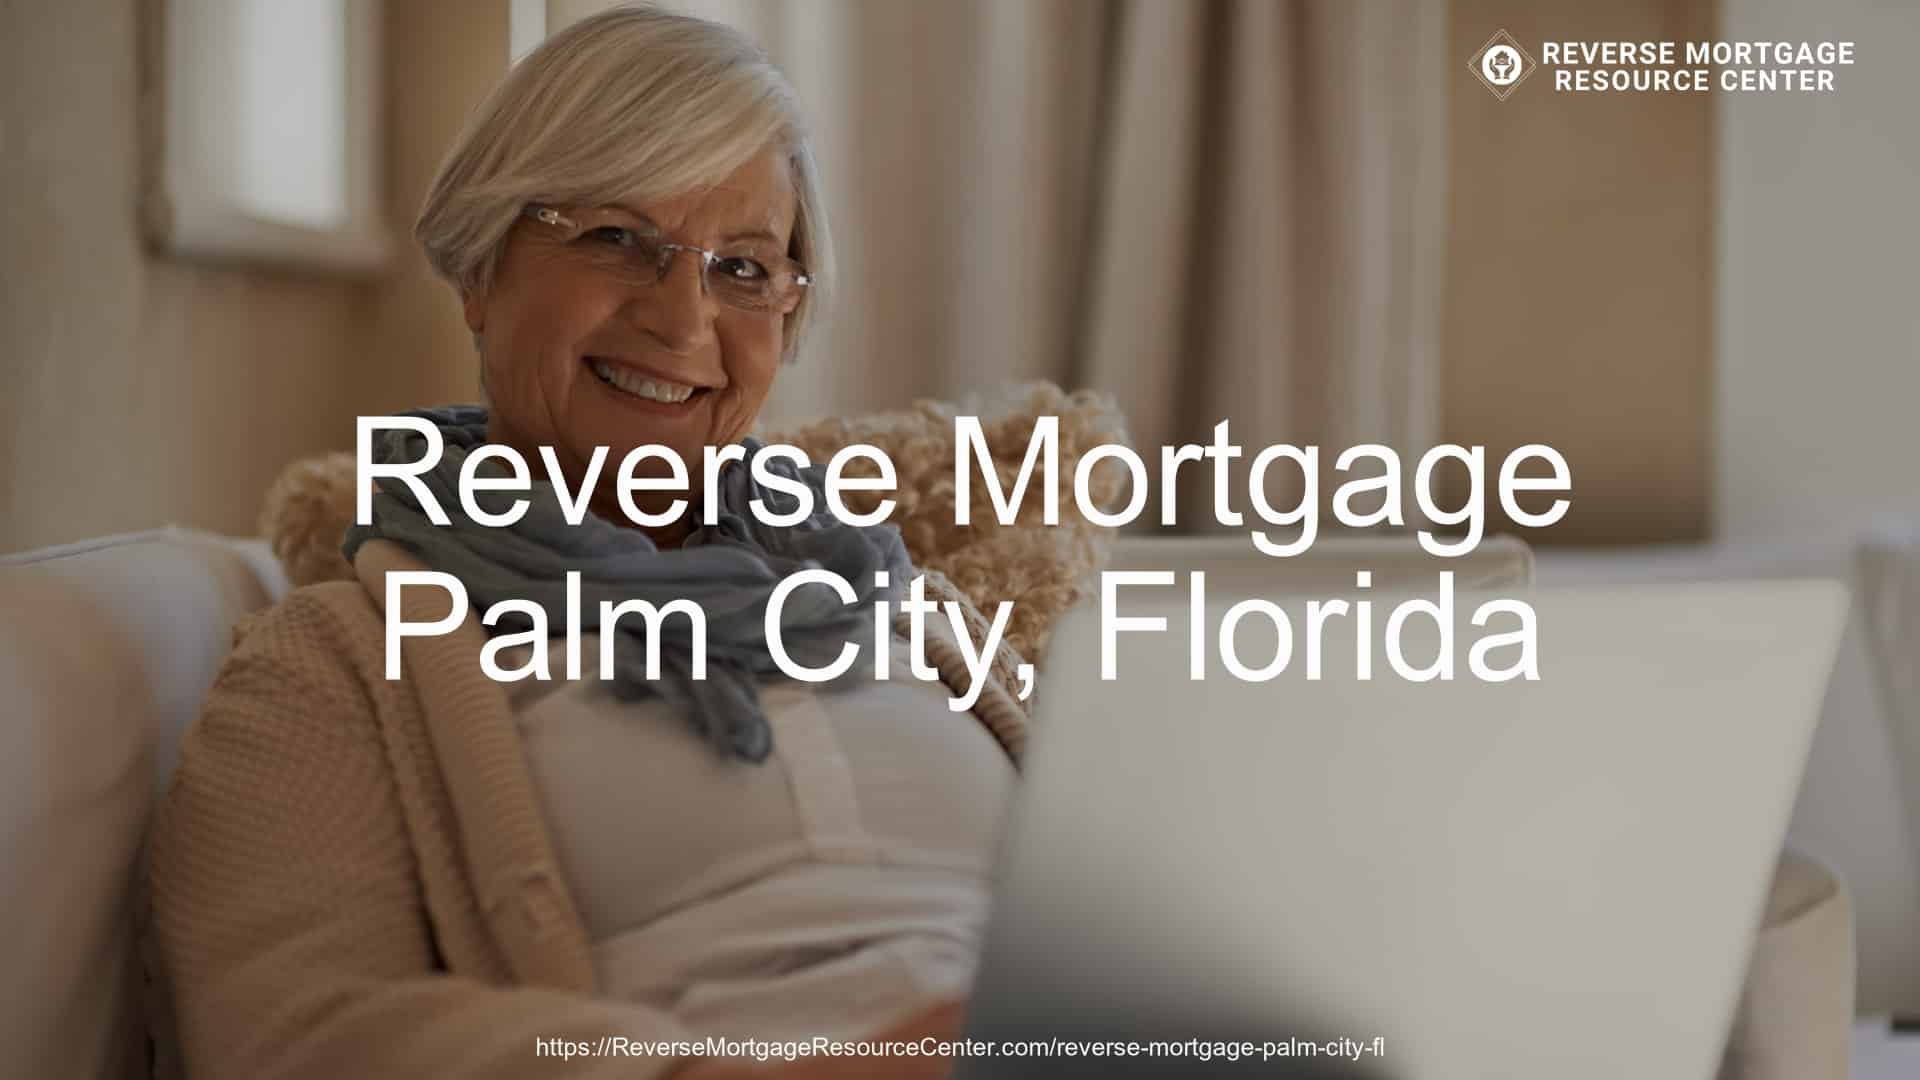 Reverse Mortgage in Palm City, FL